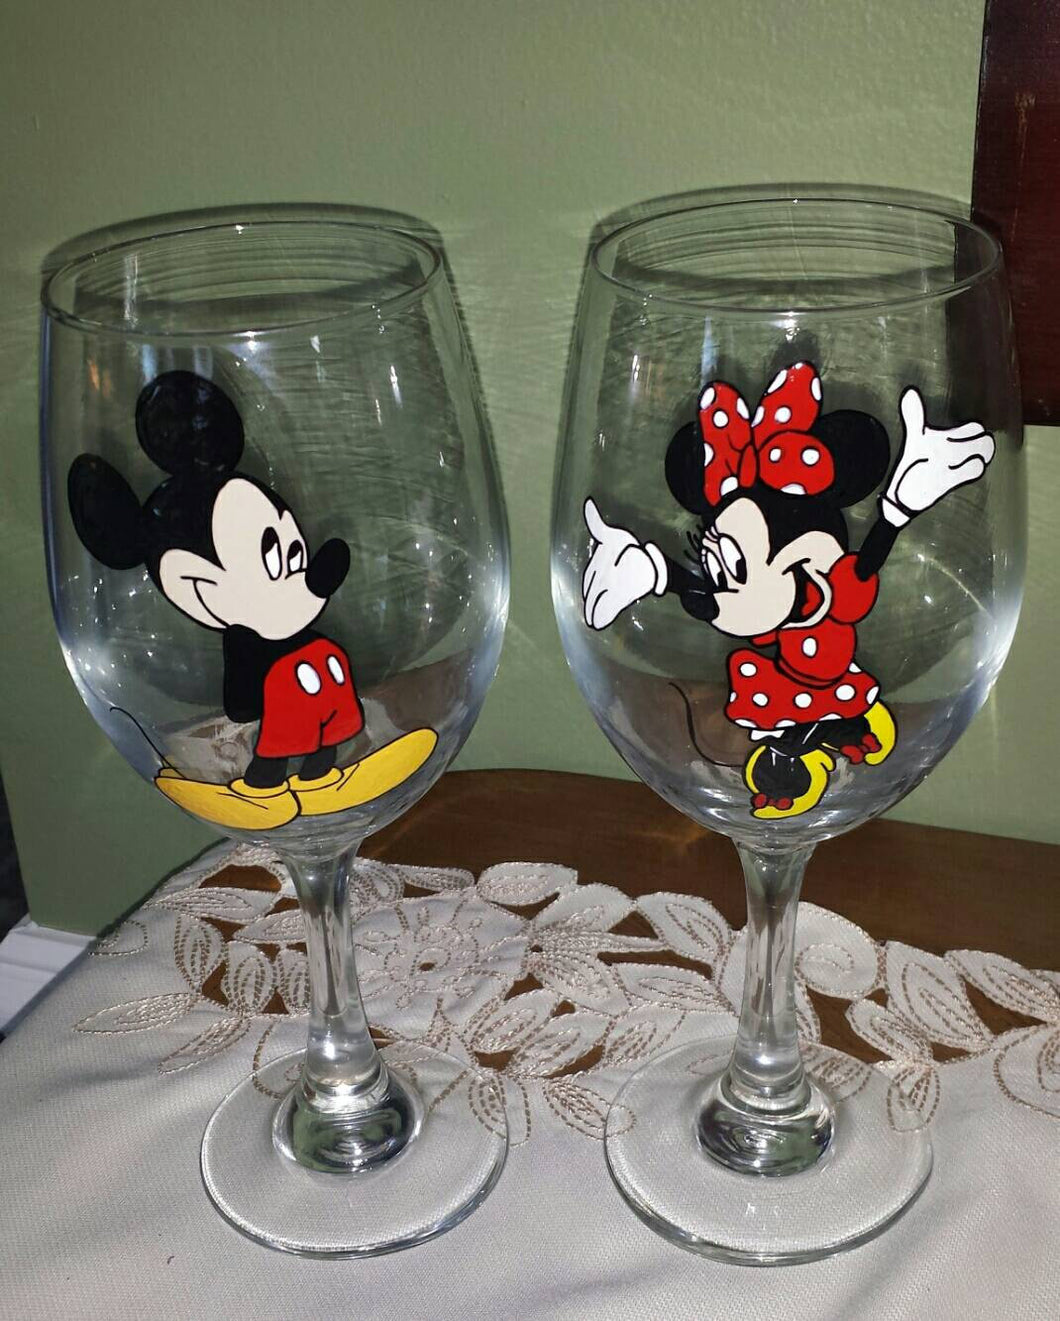 Decorative Disney inspired Mickey mouse minnie mouse hand painted wine glasses